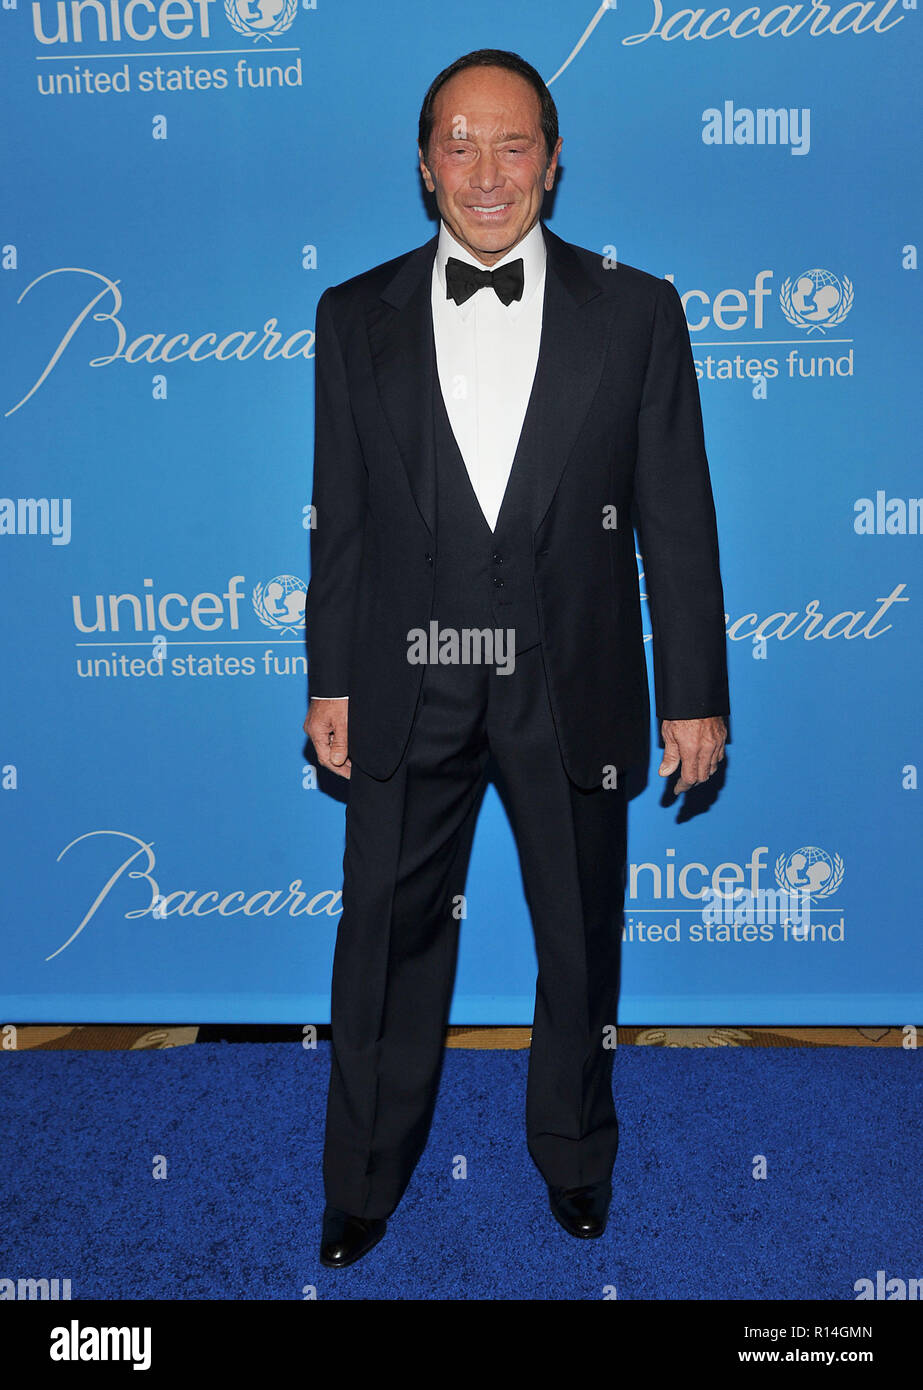 Paul Anka 51  - 2009 UNICEF Ball at the Beverly Wilshire Hotel In Los AngelesPaul Anka 51 Red Carpet Event, Vertical, USA, Film Industry, Celebrities,  Photography, Bestof, Arts Culture and Entertainment, Topix Celebrities fashion /  Vertical, Best of, Event in Hollywood Life - California,  Red Carpet and backstage, USA, Film Industry, Celebrities,  movie celebrities, TV celebrities, Music celebrities, Photography, Bestof, Arts Culture and Entertainment,  Topix, vertical, one person,, from the year , 2009, inquiry tsuni@Gamma-USA.com Fashion - Full Length Stock Photo